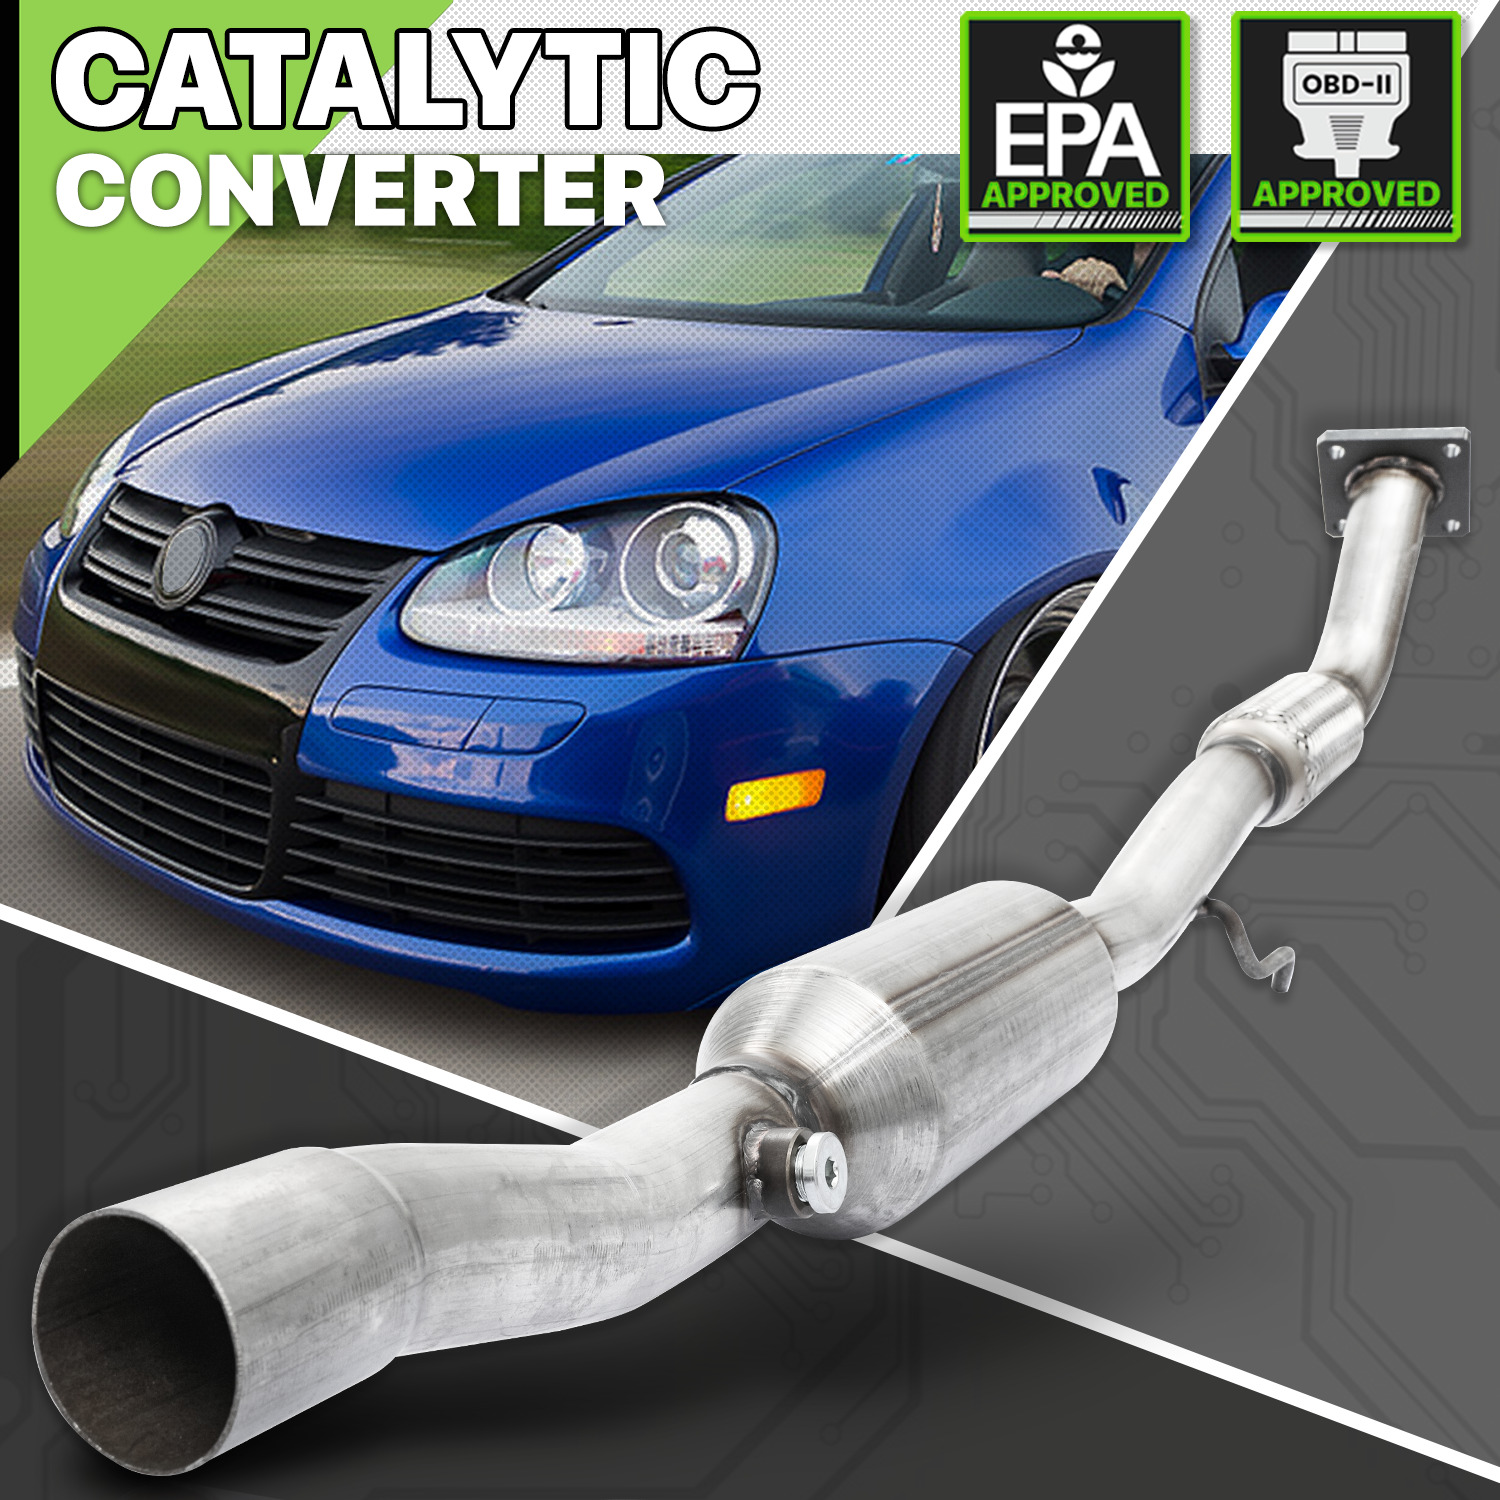 Catalytic Converter Exhaust Down Pipe For VW Golf/Jetta/Beetle 2001-2006 2.0 I4